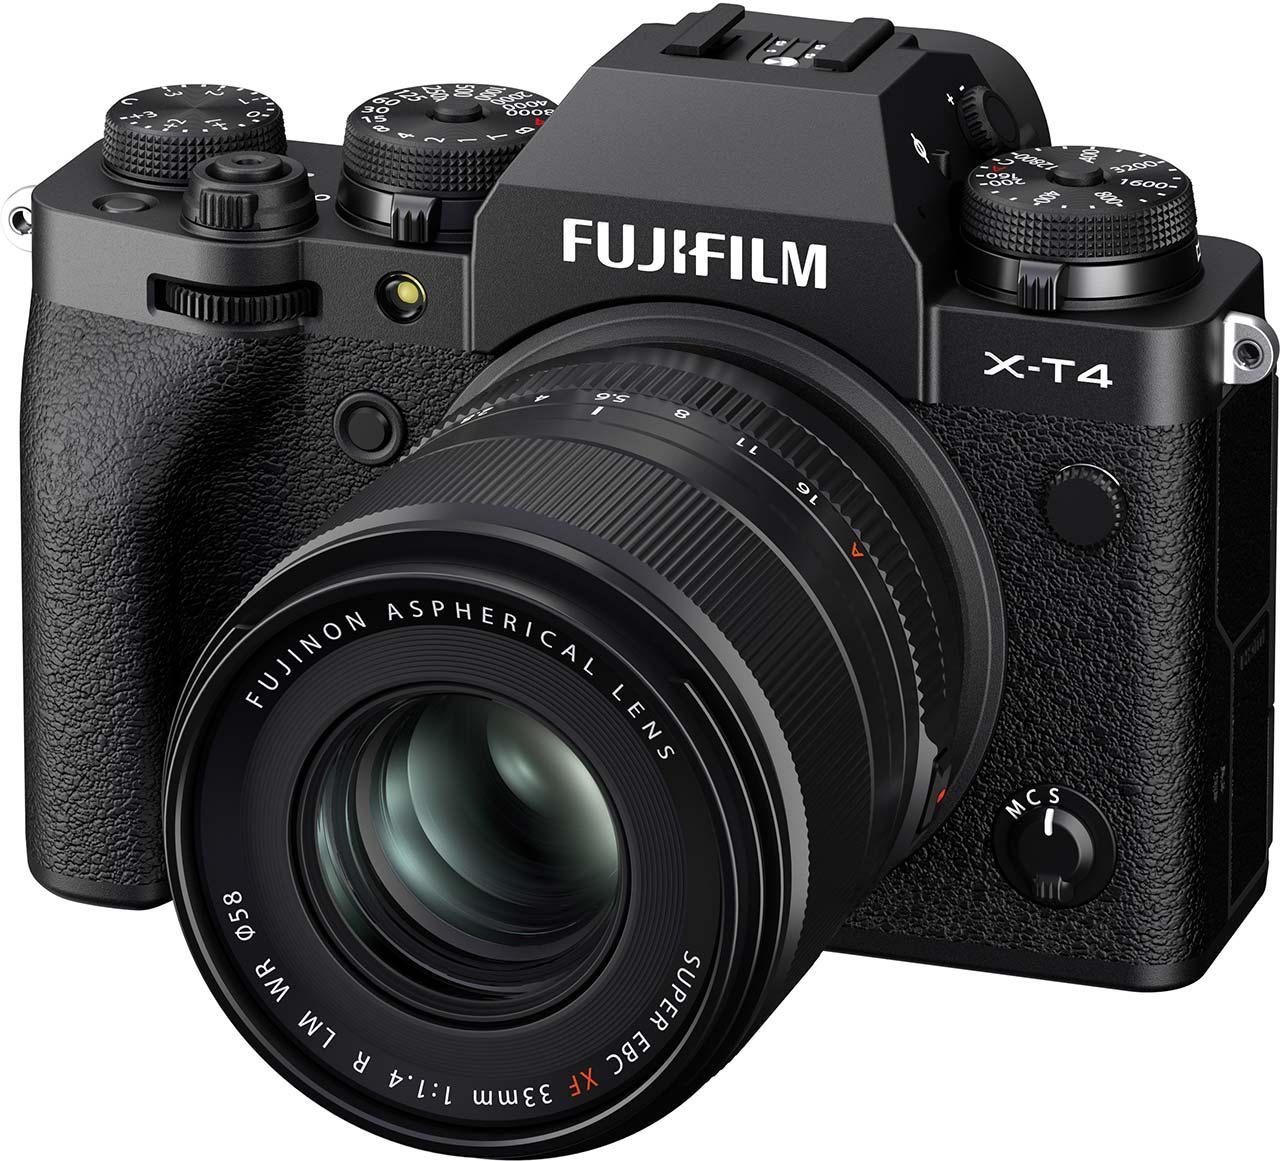 Fujifilm XF 33mm F1.4 R LM WR is a New Standard Prime Lens for 